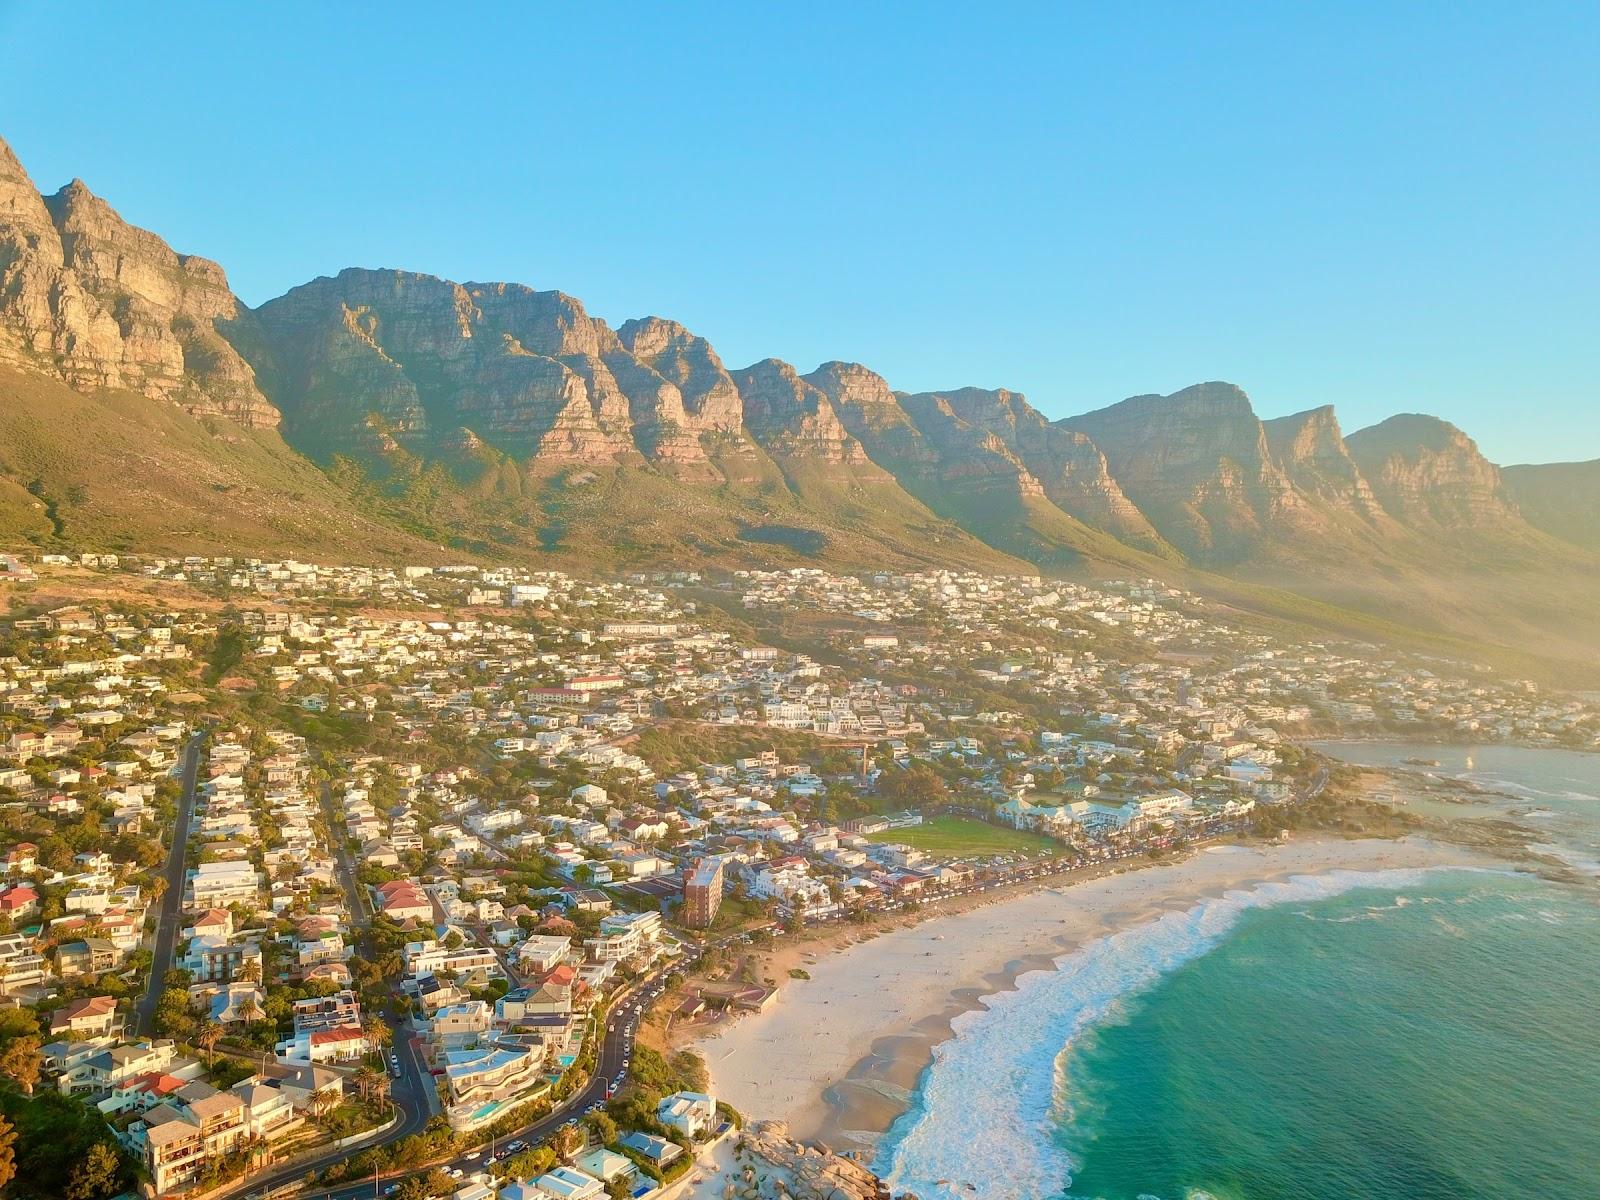 A South African beach side town.